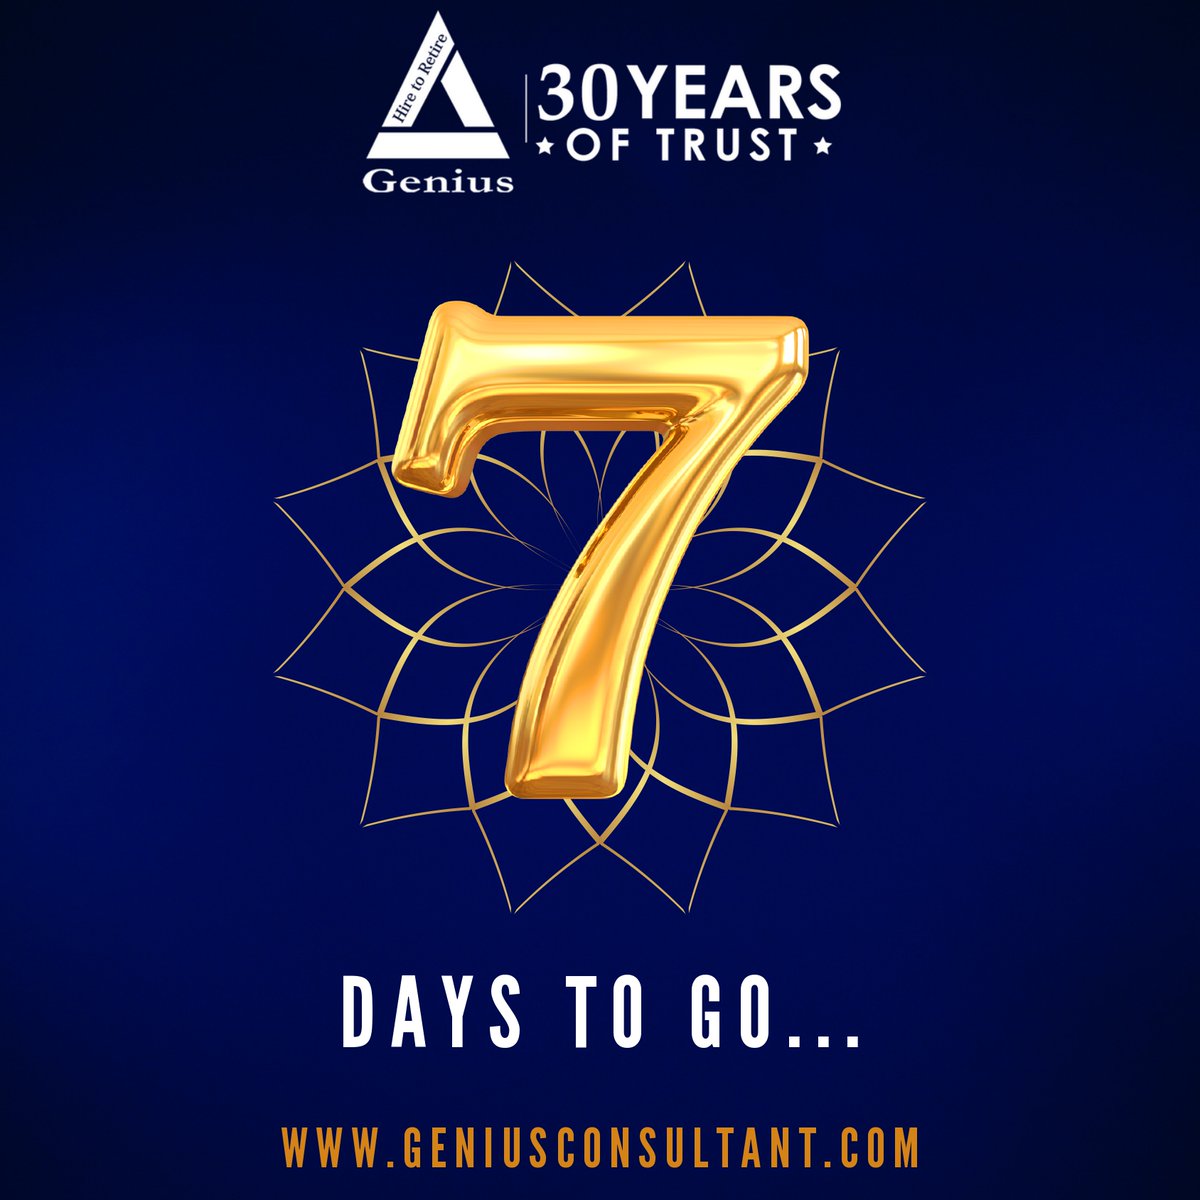 The much-anticipated Genius Annual Business Conference & Award Ceremony is now counting down! Join us in honoring our employees and partners. 07 days left!

#AwardFunction #CelebrationTime #GeniusConsultantsLtd